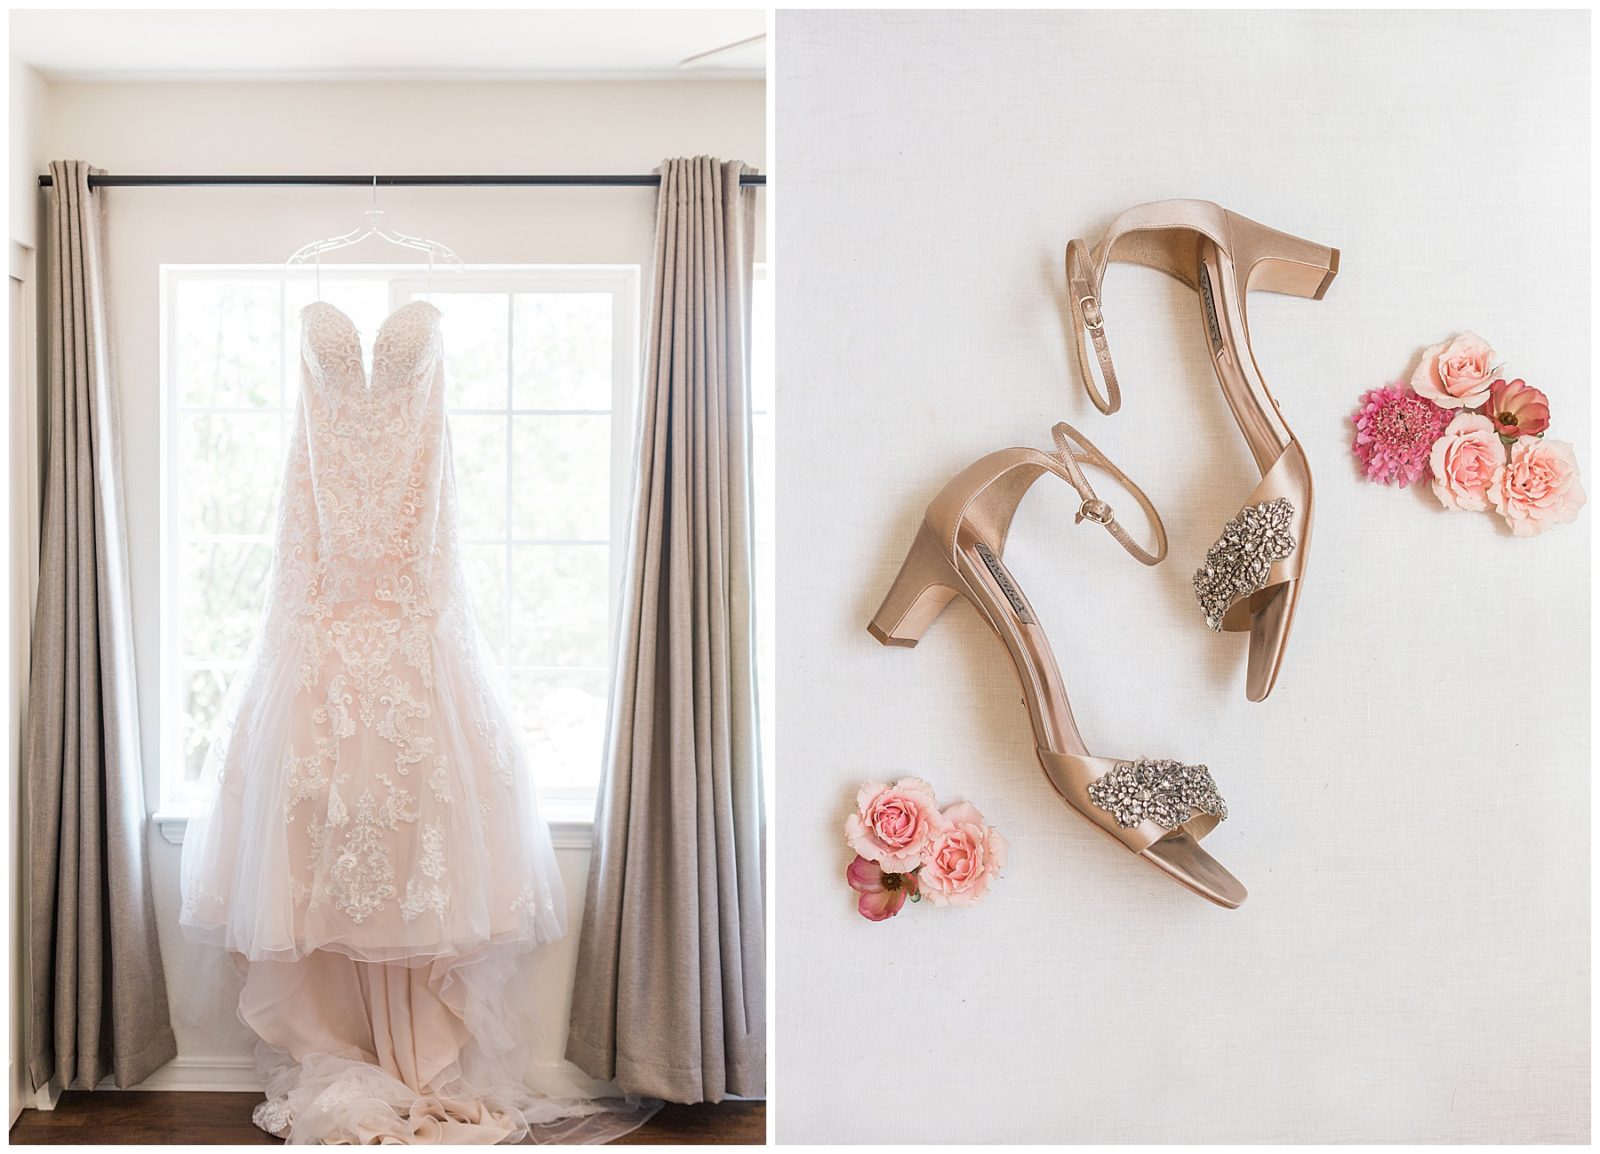 Bride's wedding dress and shoes